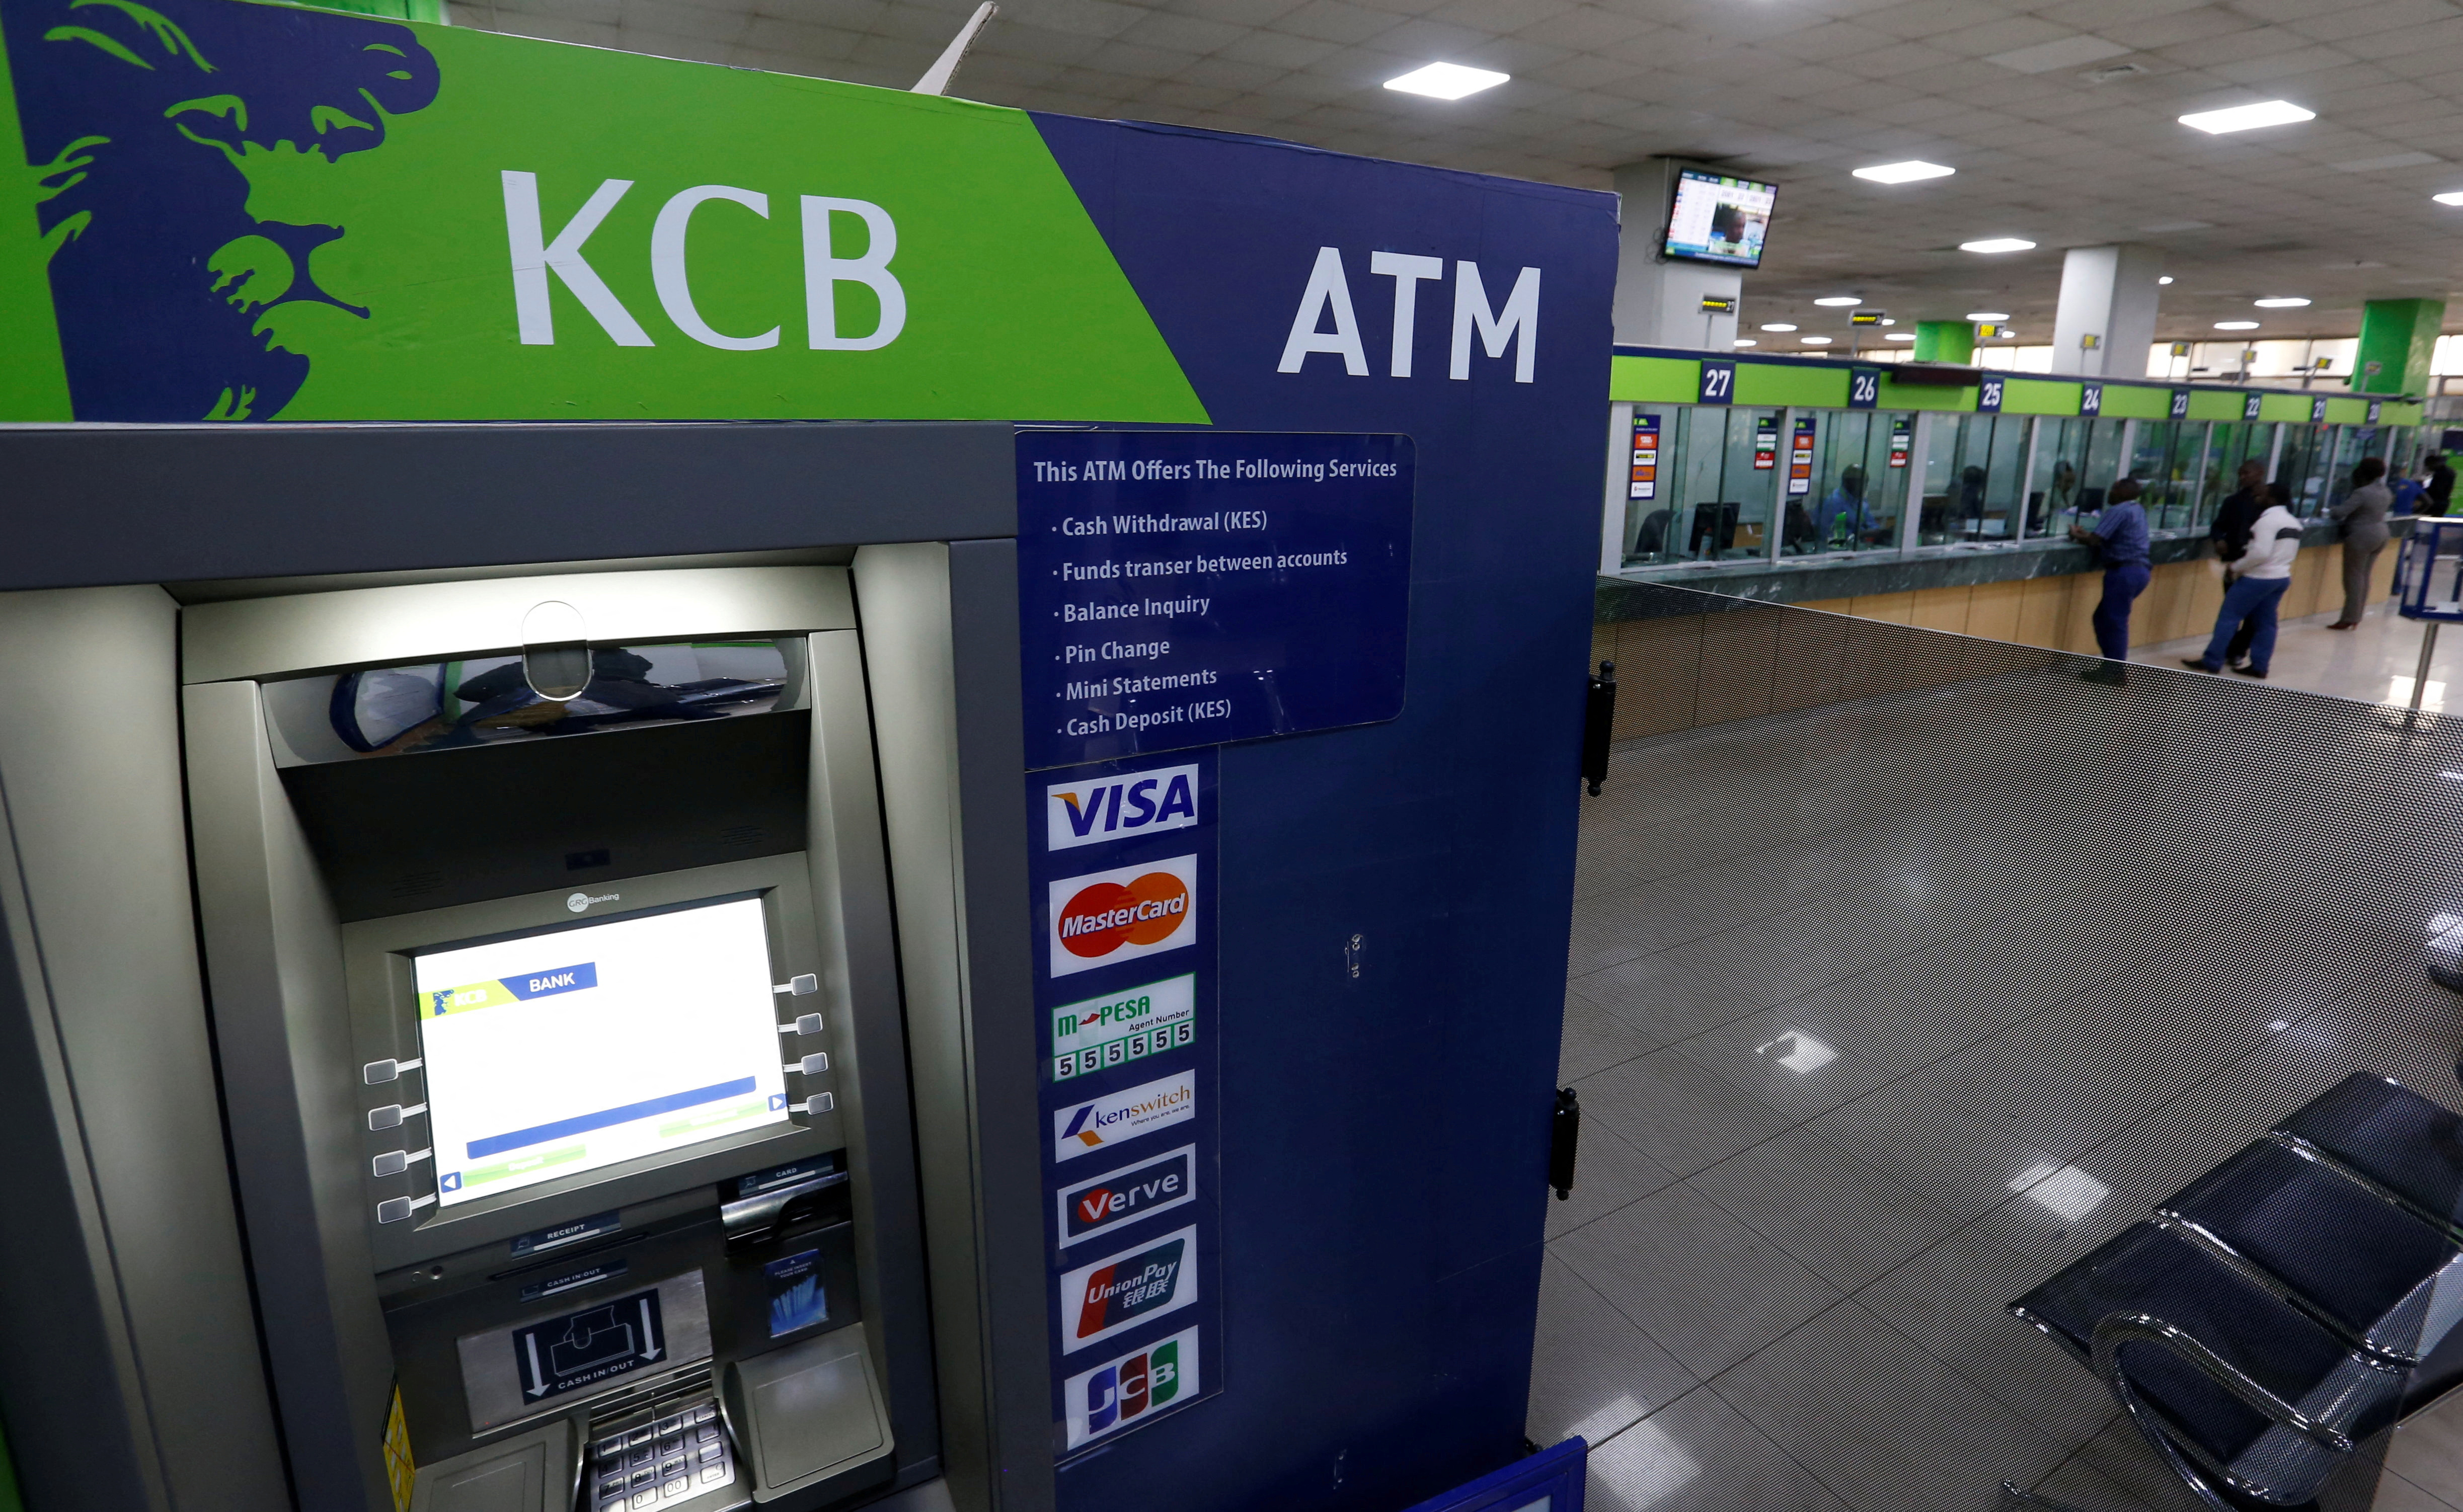 An ATM is seen in the banking hall at the KCB Kencom branch in Nairobi